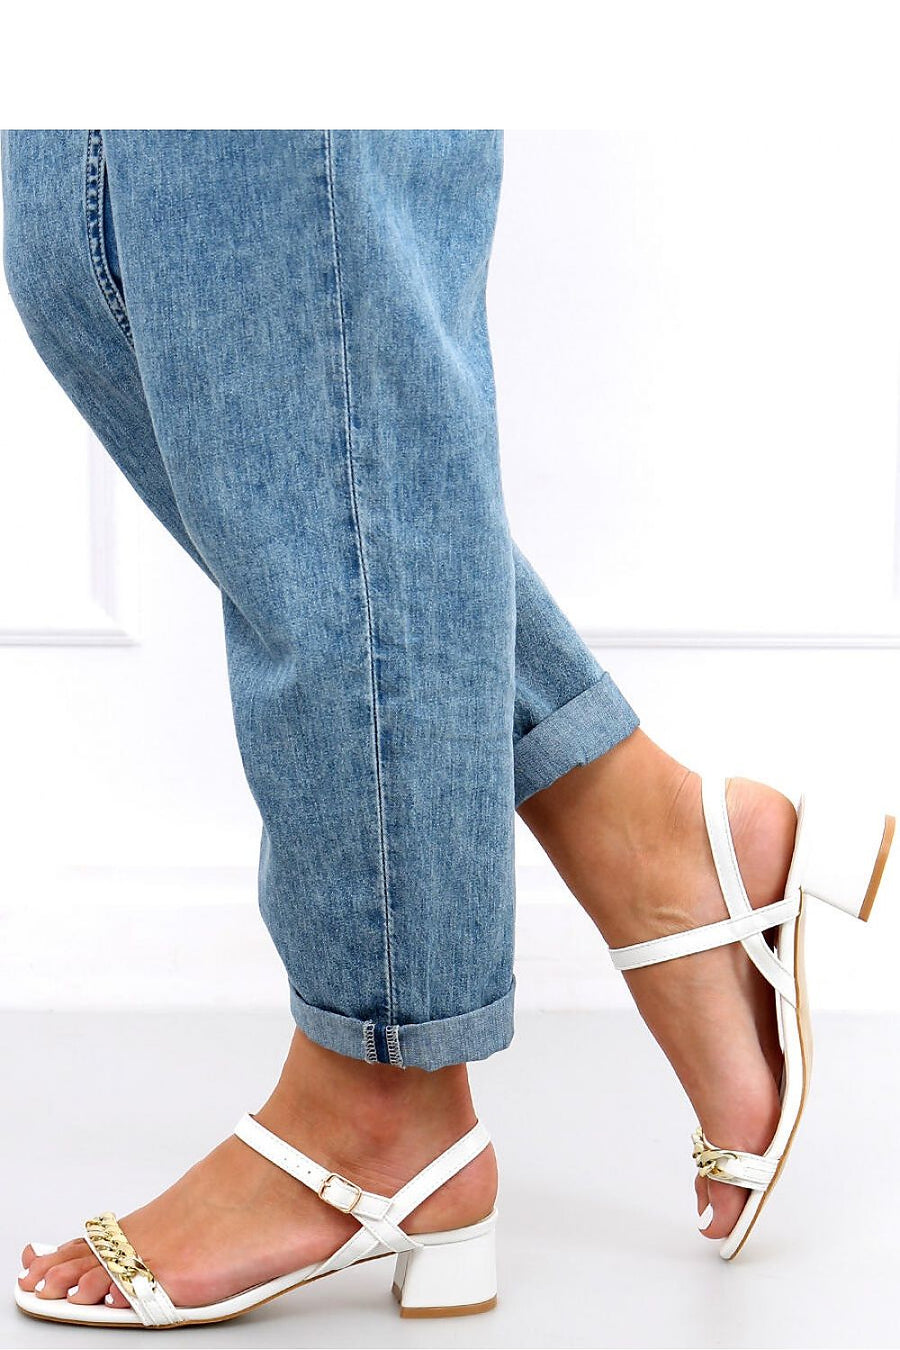 Heeled sandals in white